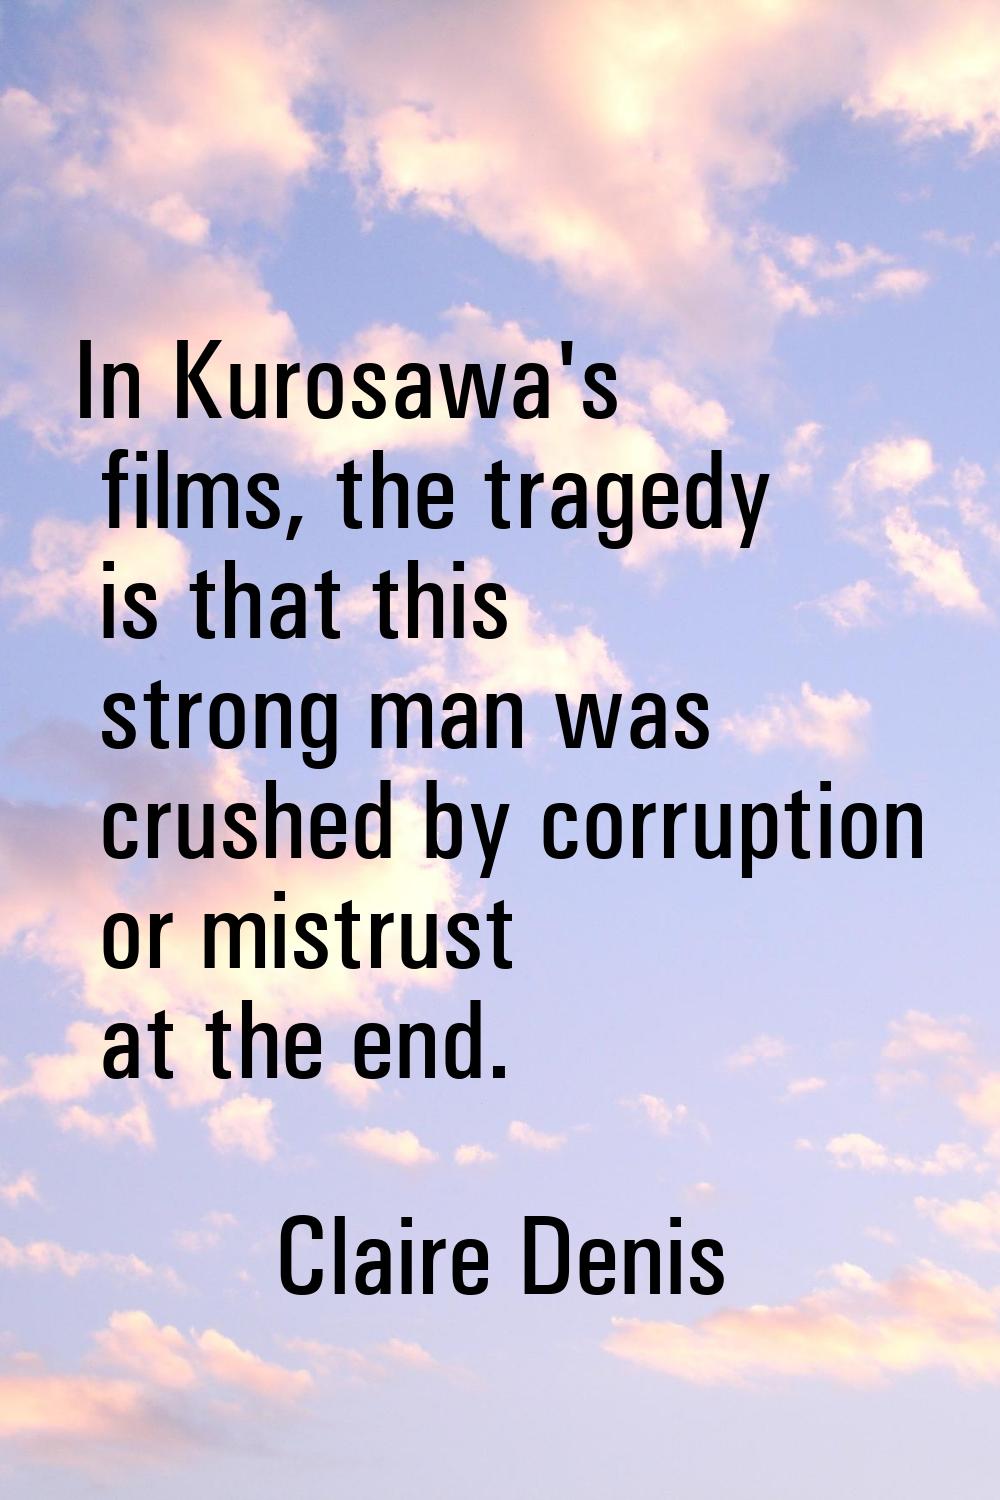 In Kurosawa's films, the tragedy is that this strong man was crushed by corruption or mistrust at t